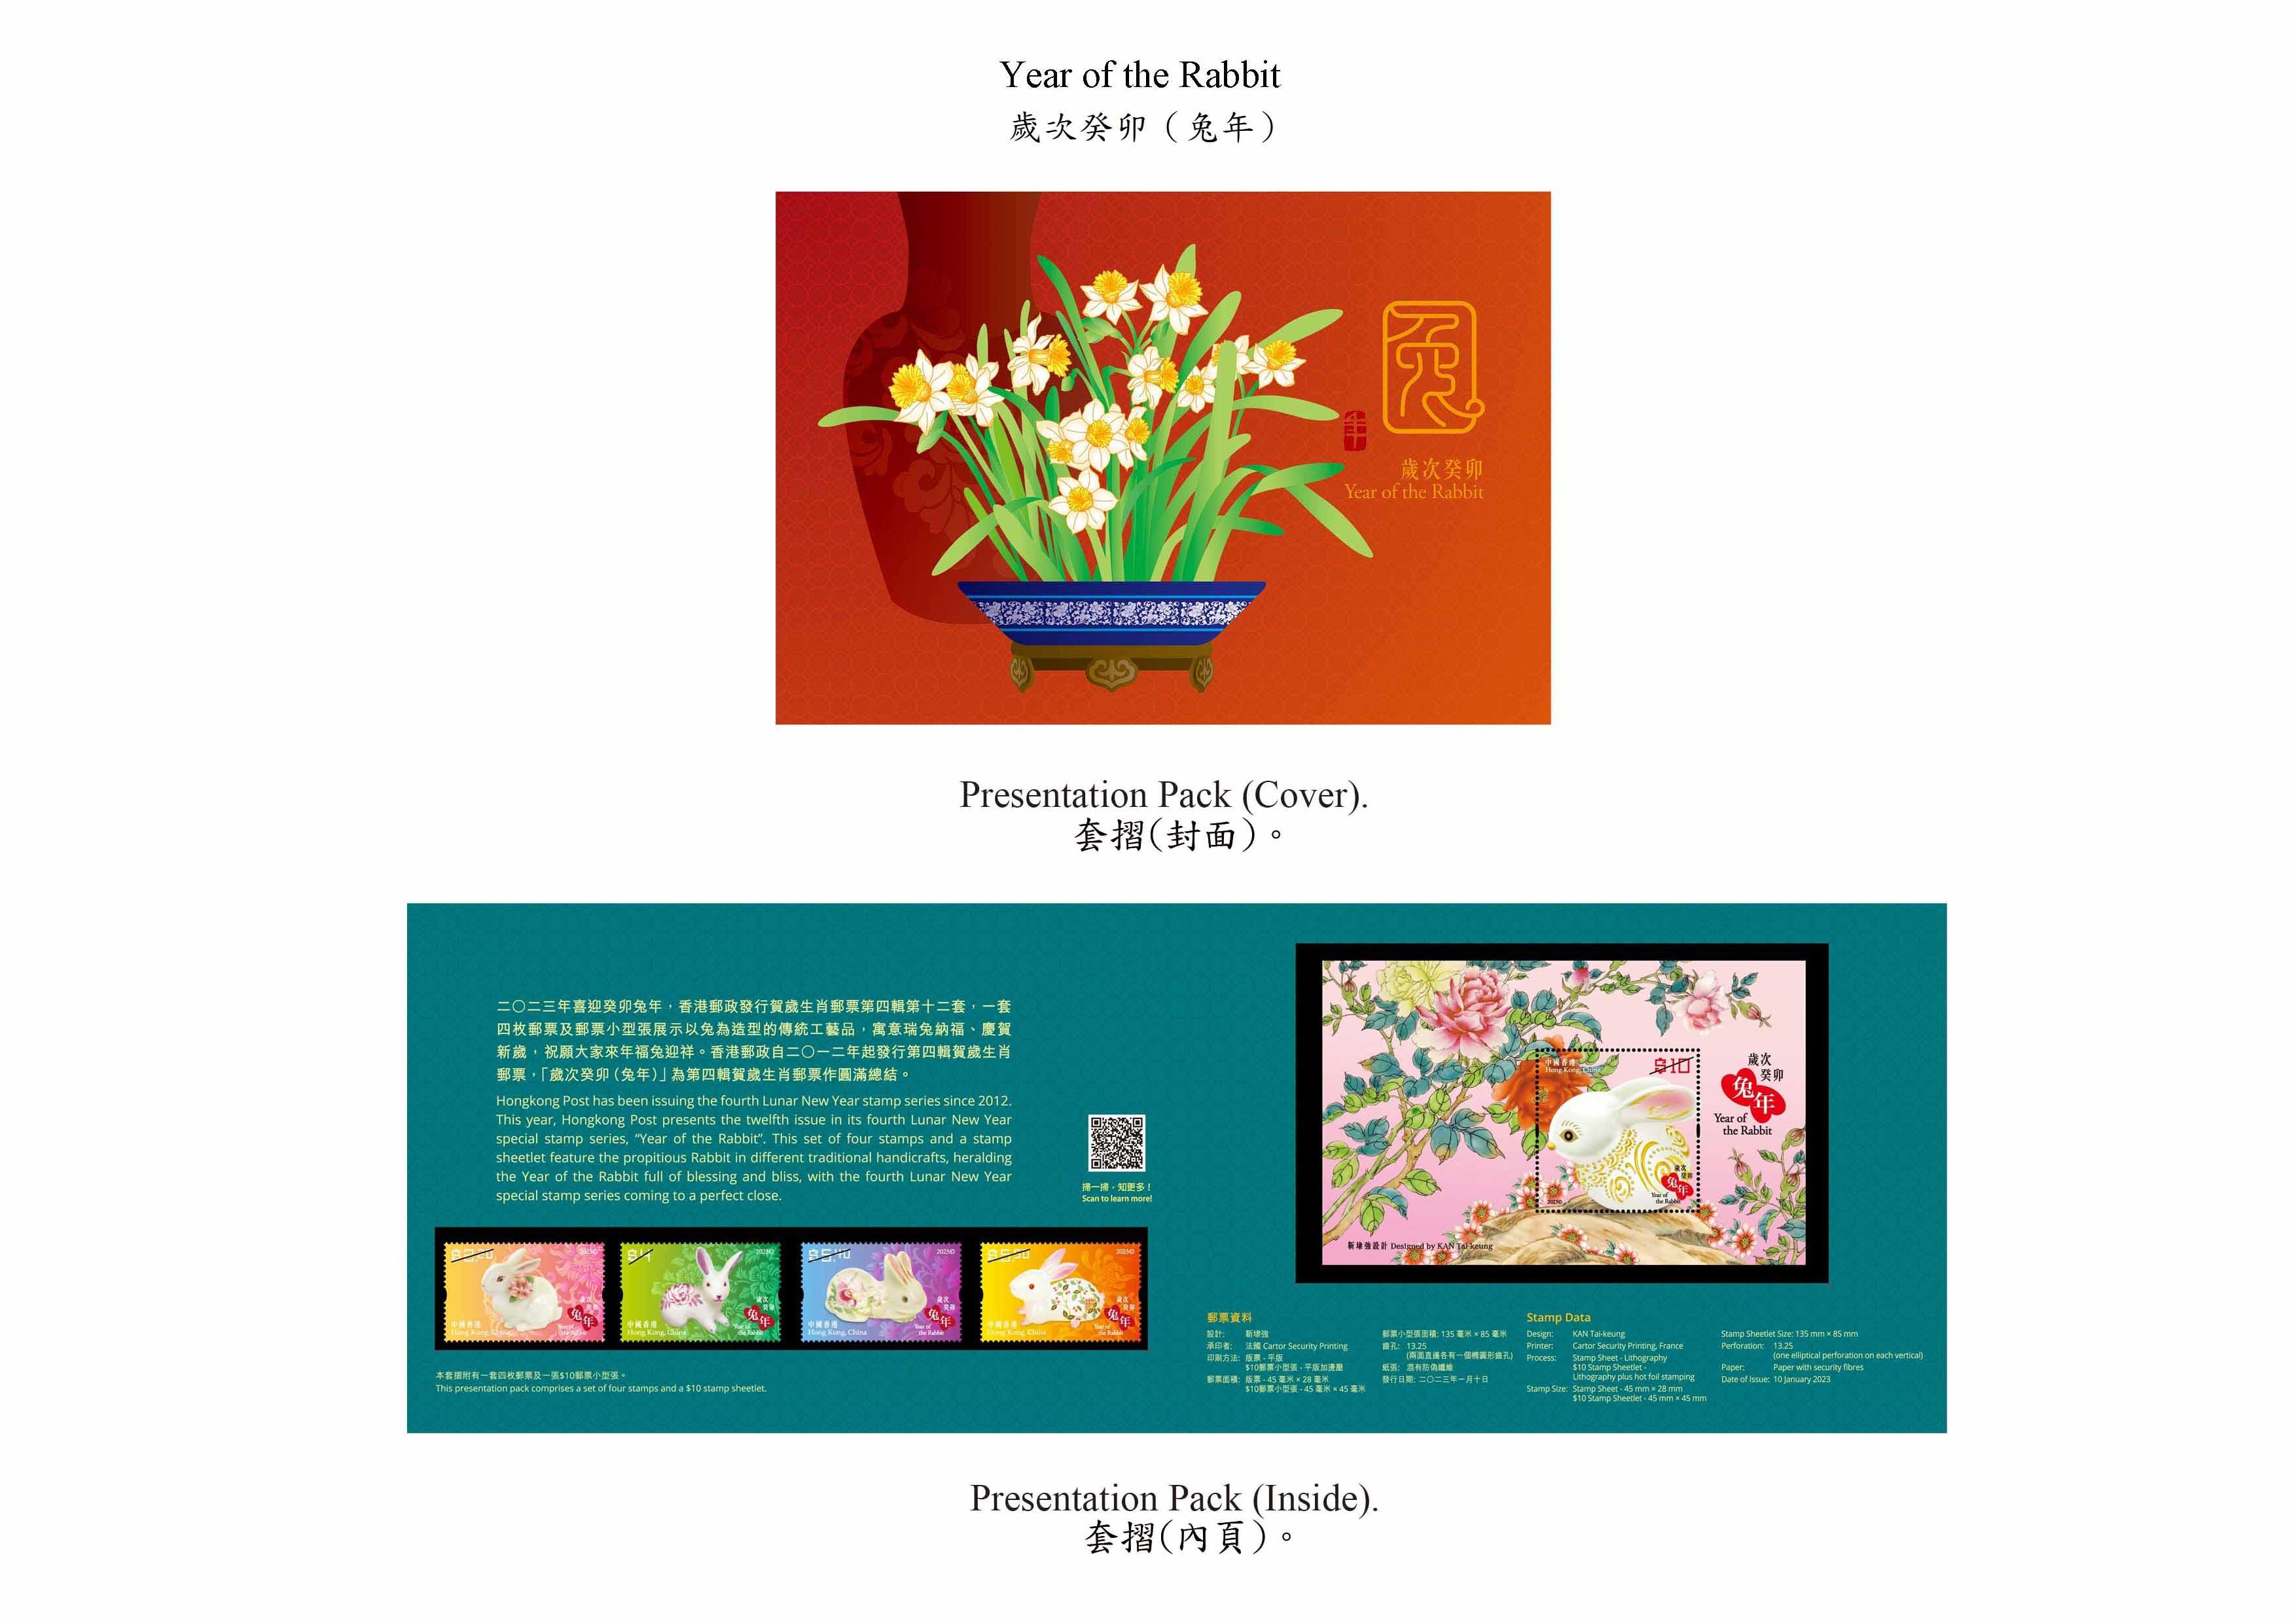 Hongkong Post will launch a special stamp issue and associated philatelic products with the theme "Year of the Rabbit" on January 10, 2023 (Tuesday). Photo shows the presentation pack.


